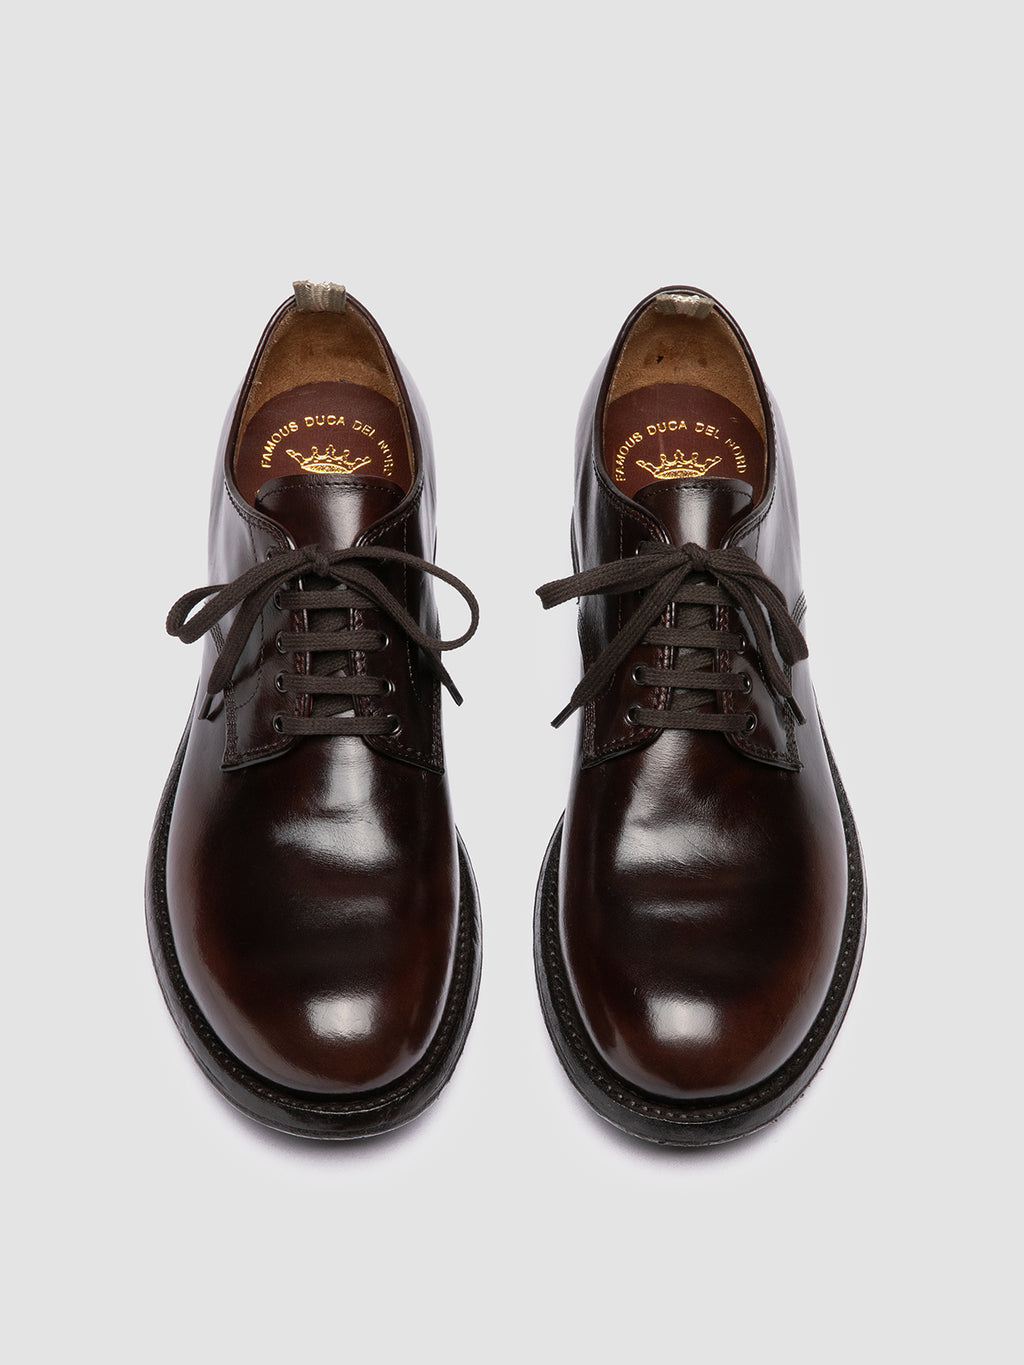 ADMIRAL 001 - Brown Leather Derby Shoes